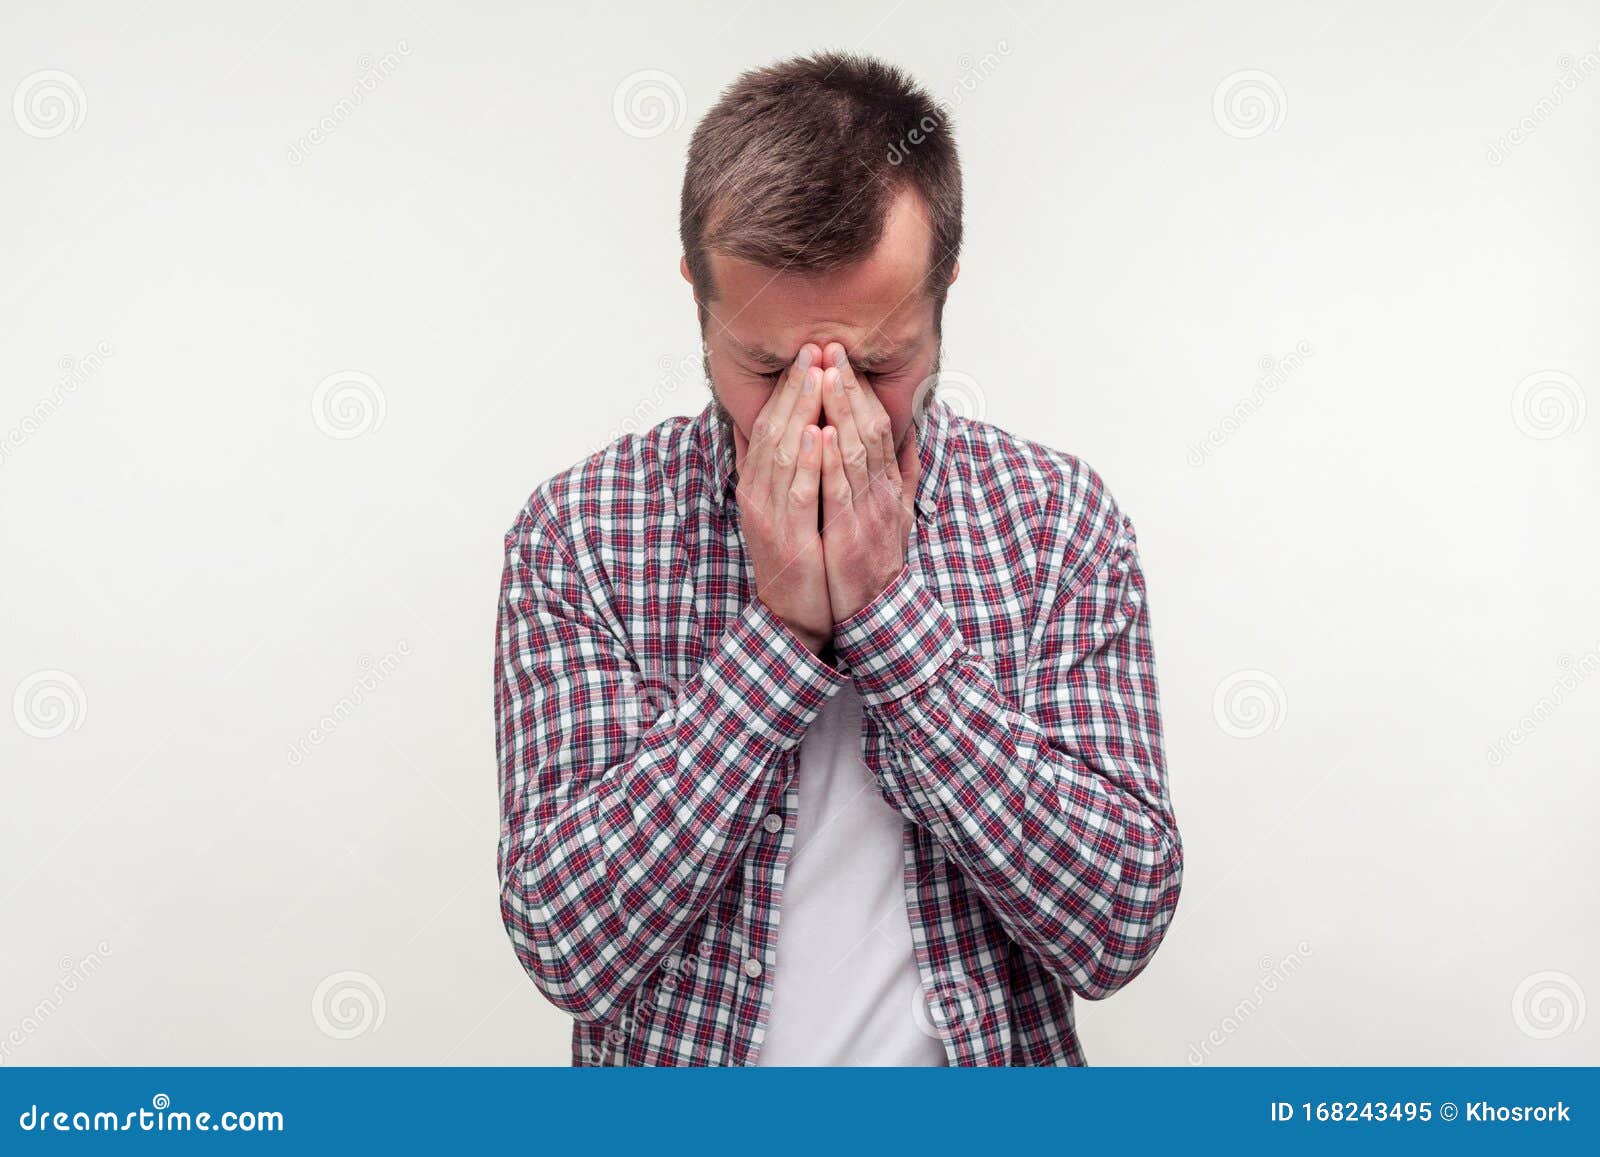 portrait of grieving bearded man hiding face in hands and crying, feeling sorrow. white background